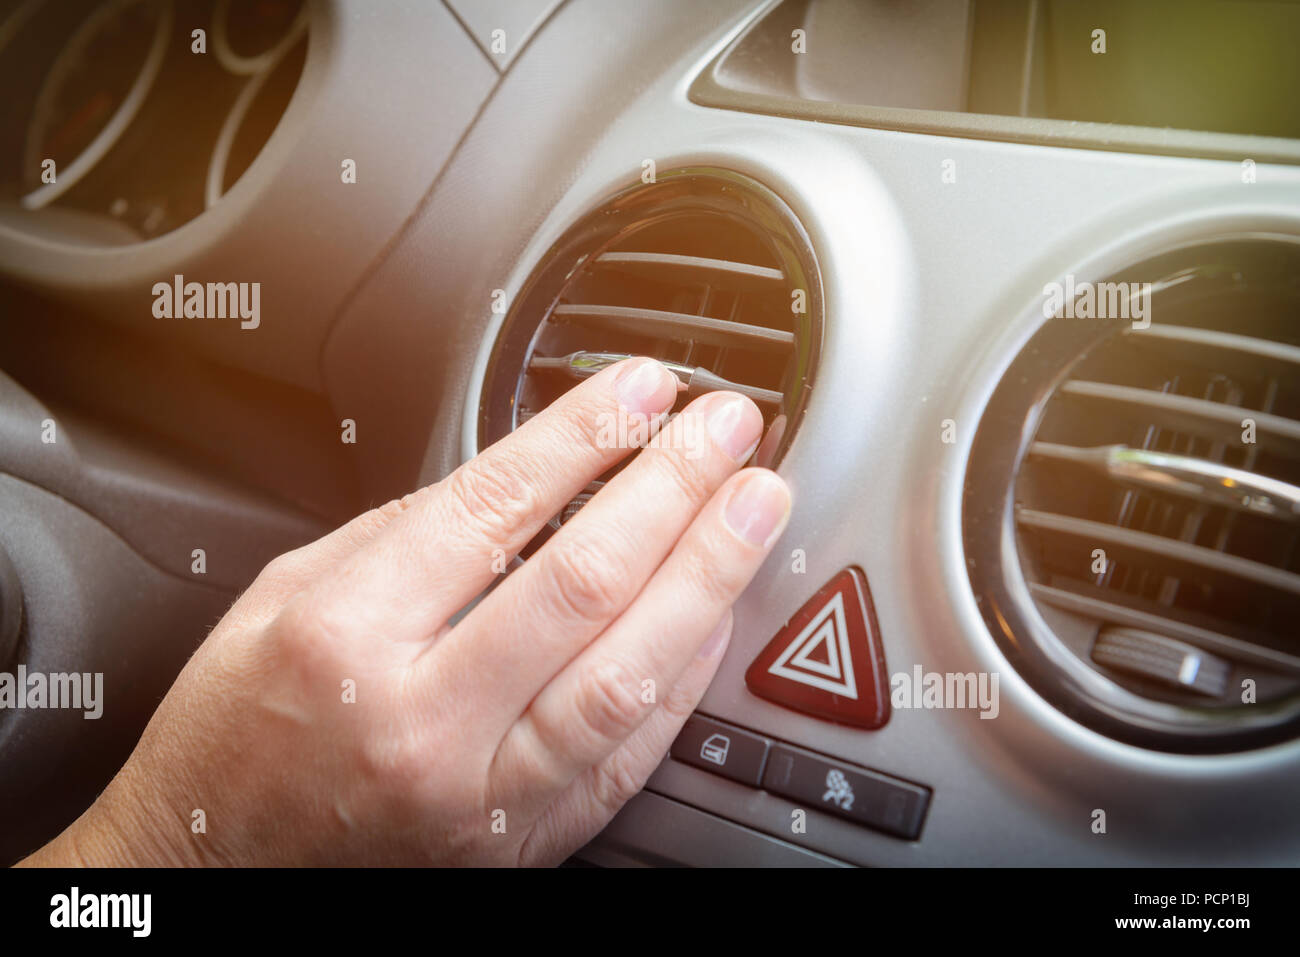 Driver hand tuning air ventilation grille, emergency flasher switch and  light in modern car interior Stock Photo - Alamy